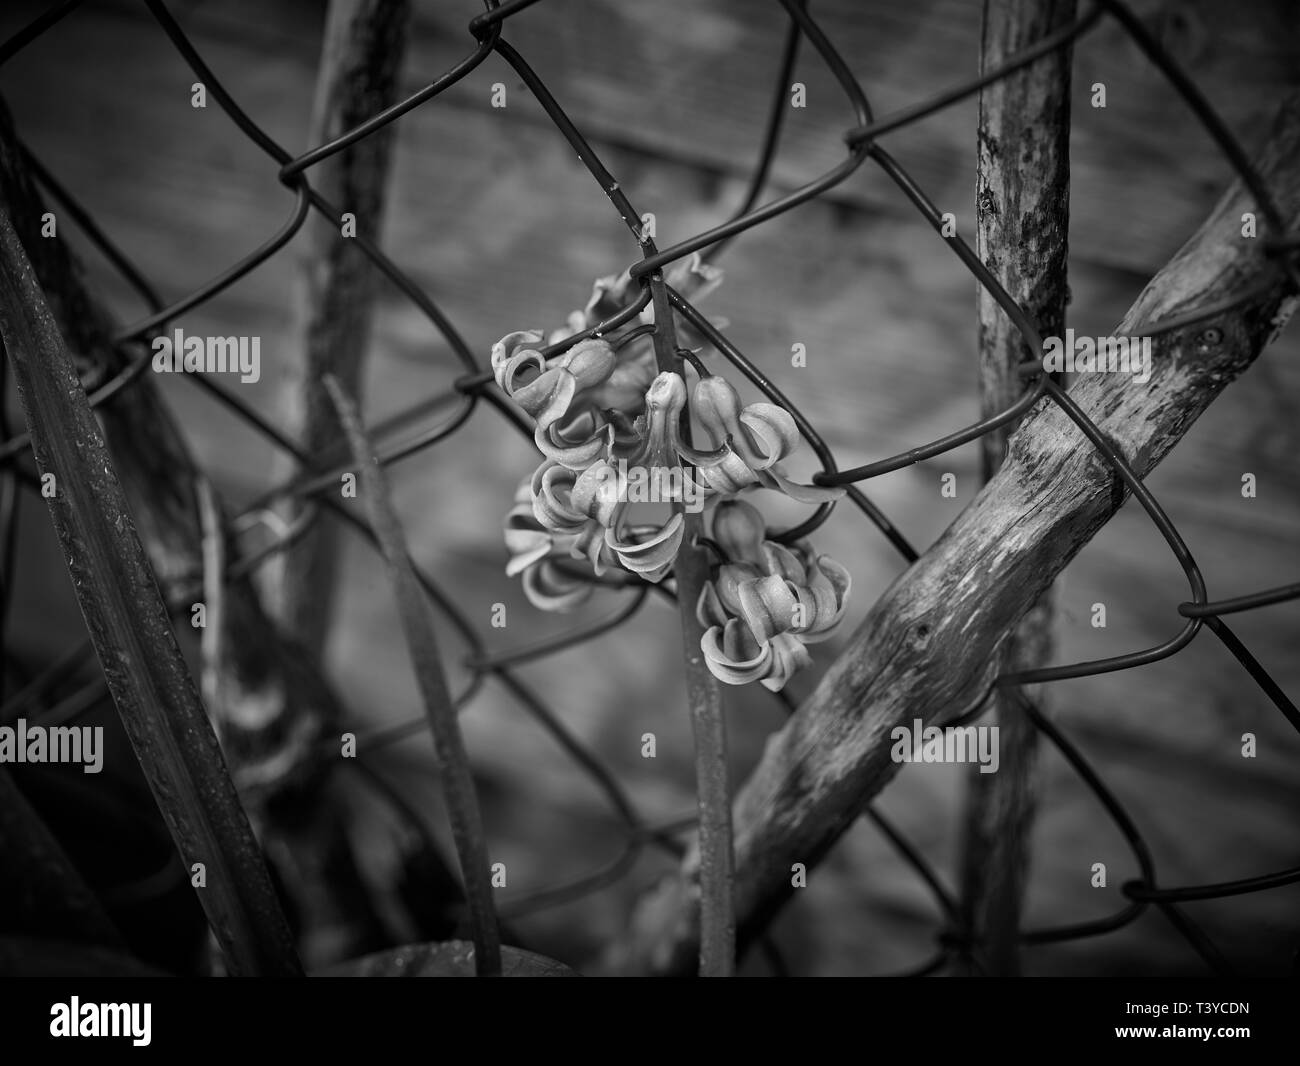 Monochrome nature portrait of Hyacinth flower against wire fencing Stock Photo